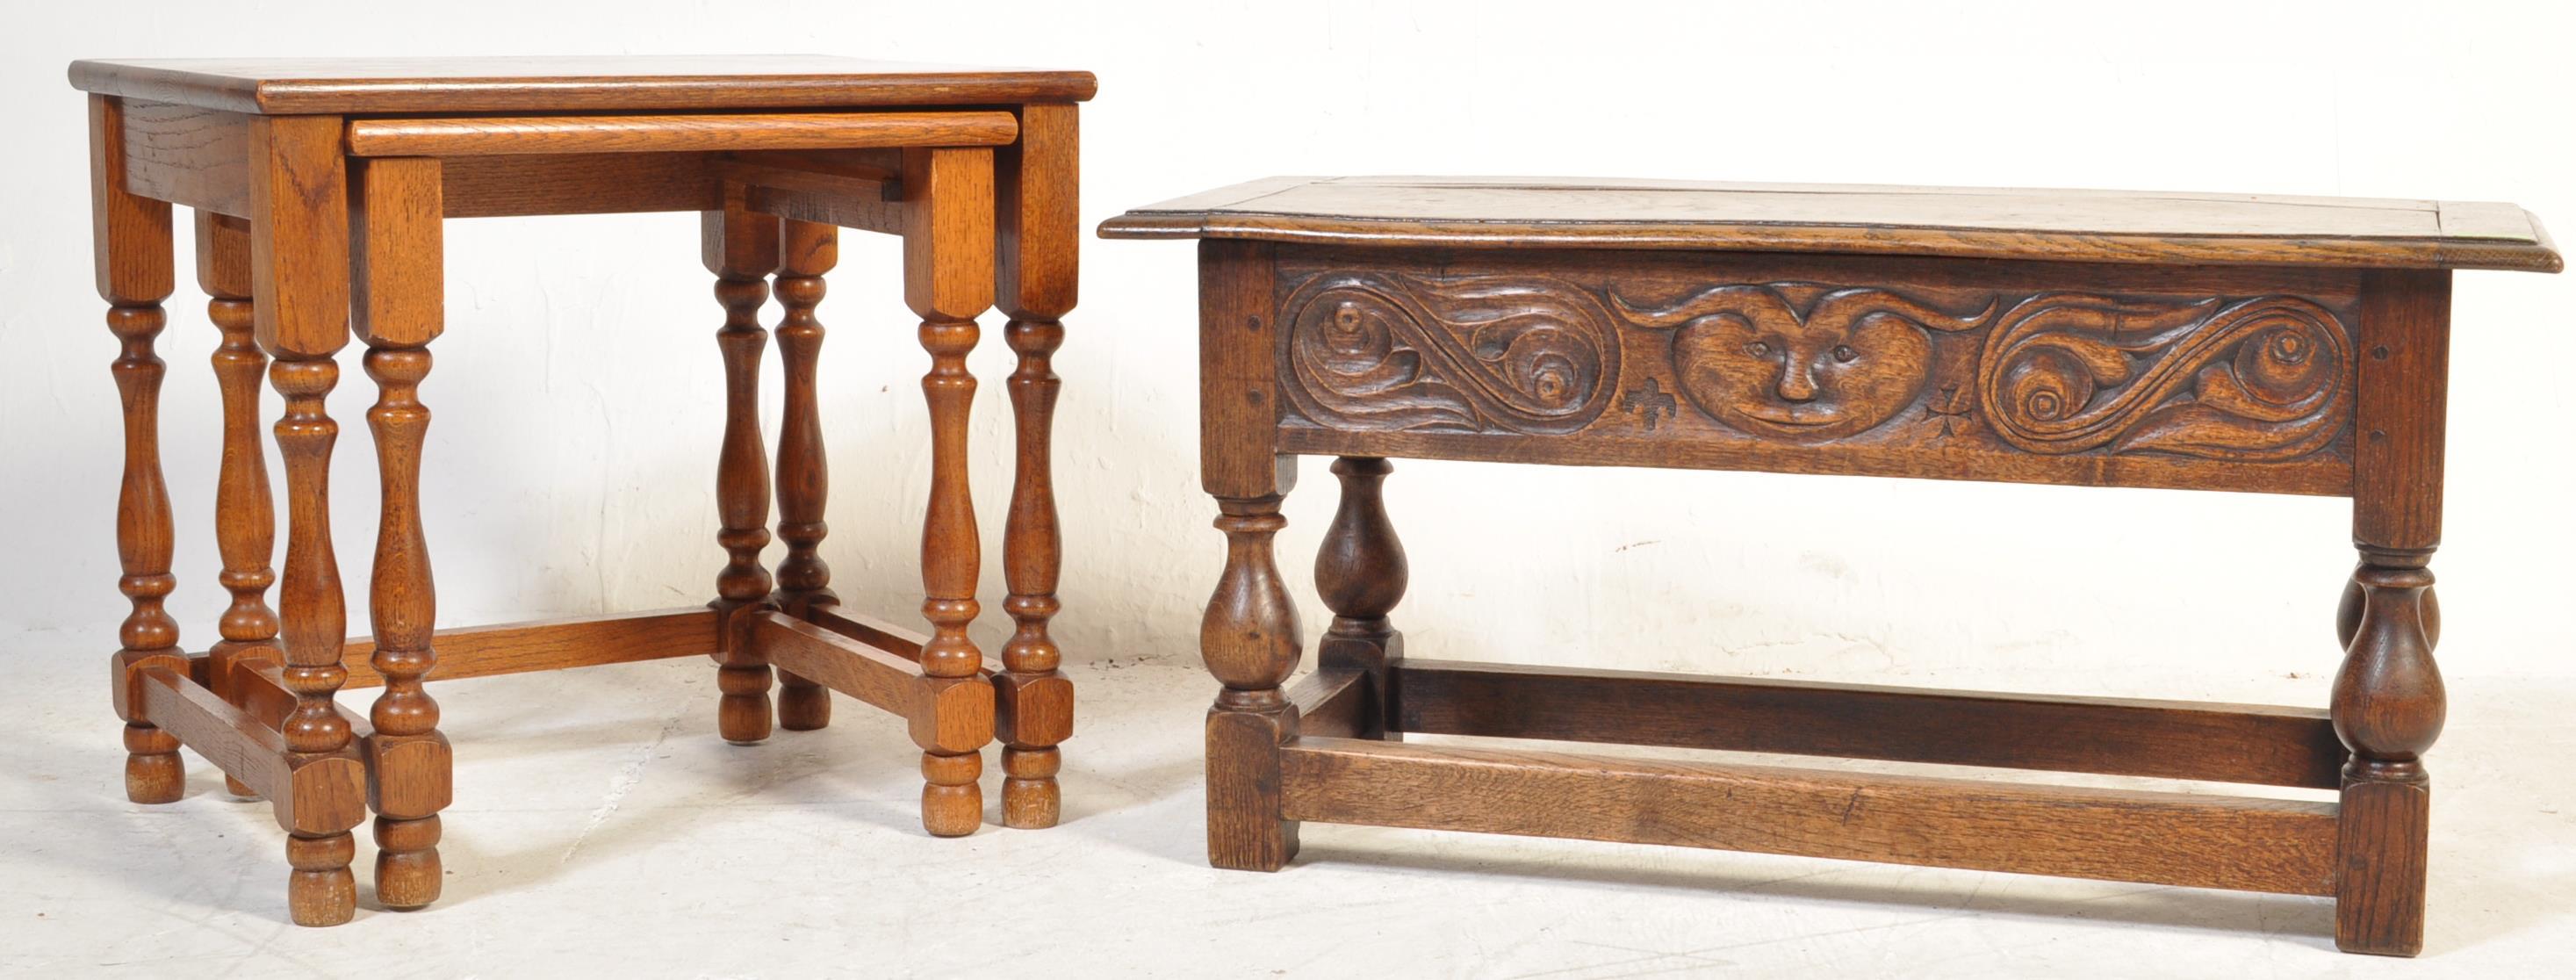 17TH CENTURY STYLE COFFER / BIBLE BOX ON STAND TOGETHER WITH A NEST OF TABLES